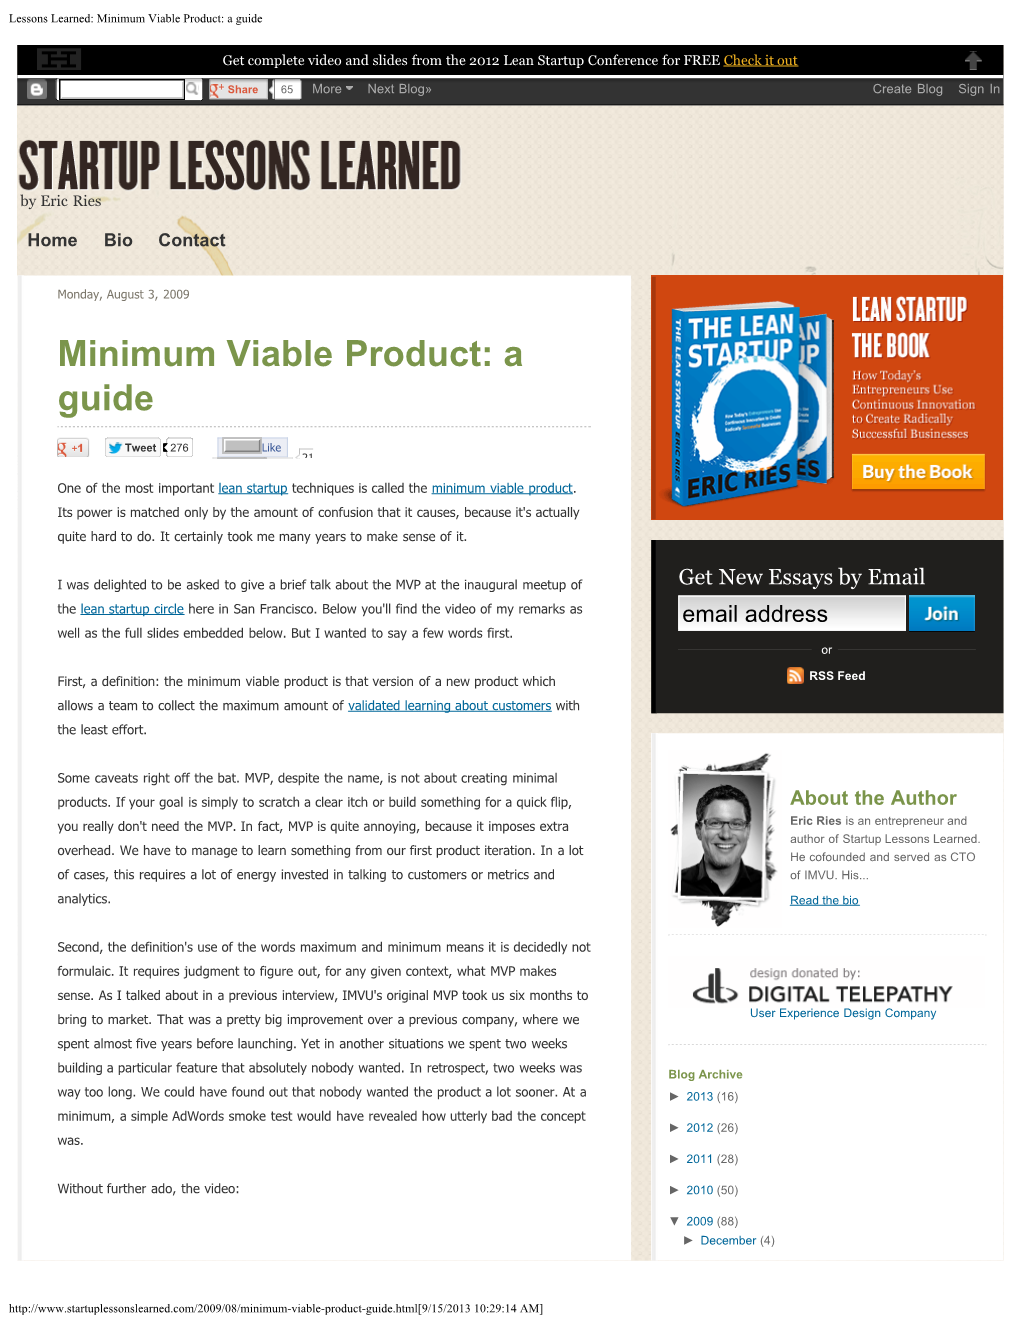 Lessons Learned: Minimum Viable Product: a Guide